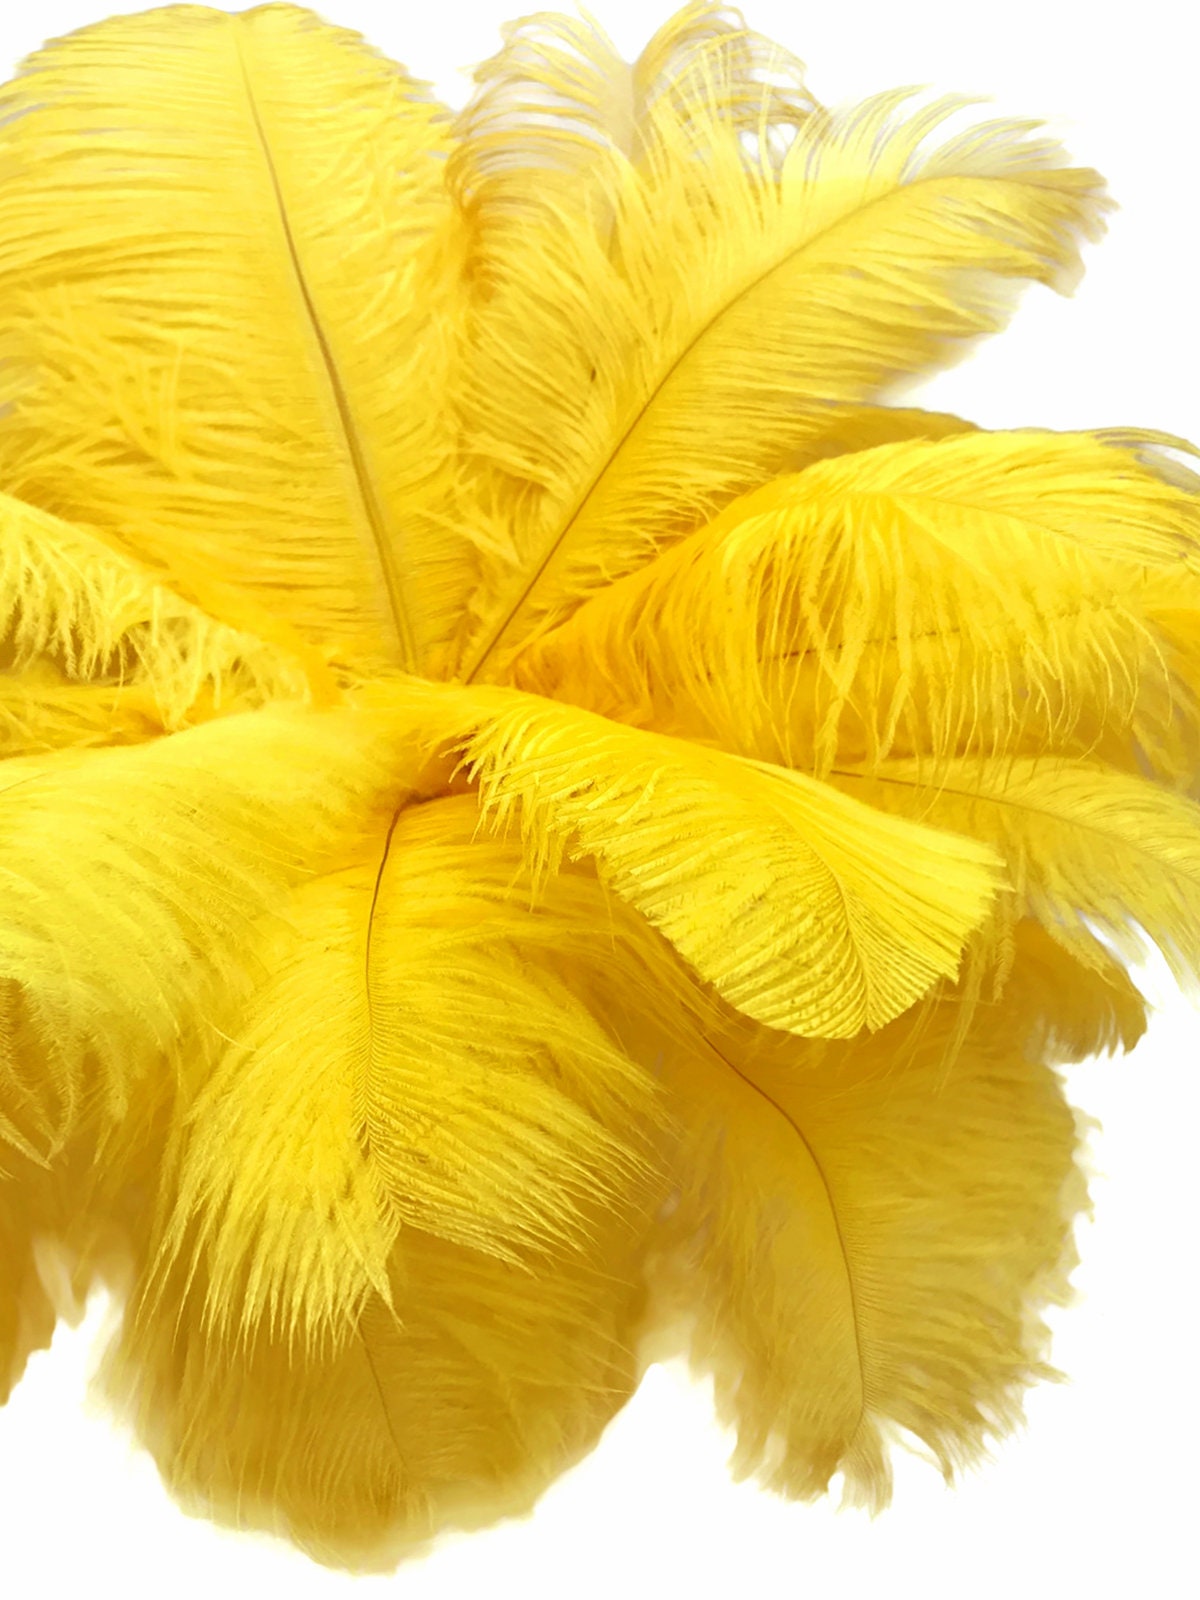 Ostrich Feathers, 10 Pieces 14-17 Yellow Ostrich Dyed Drab Large Body  Feathers Centerpiece Carnival Supplier : 3466 -  Norway